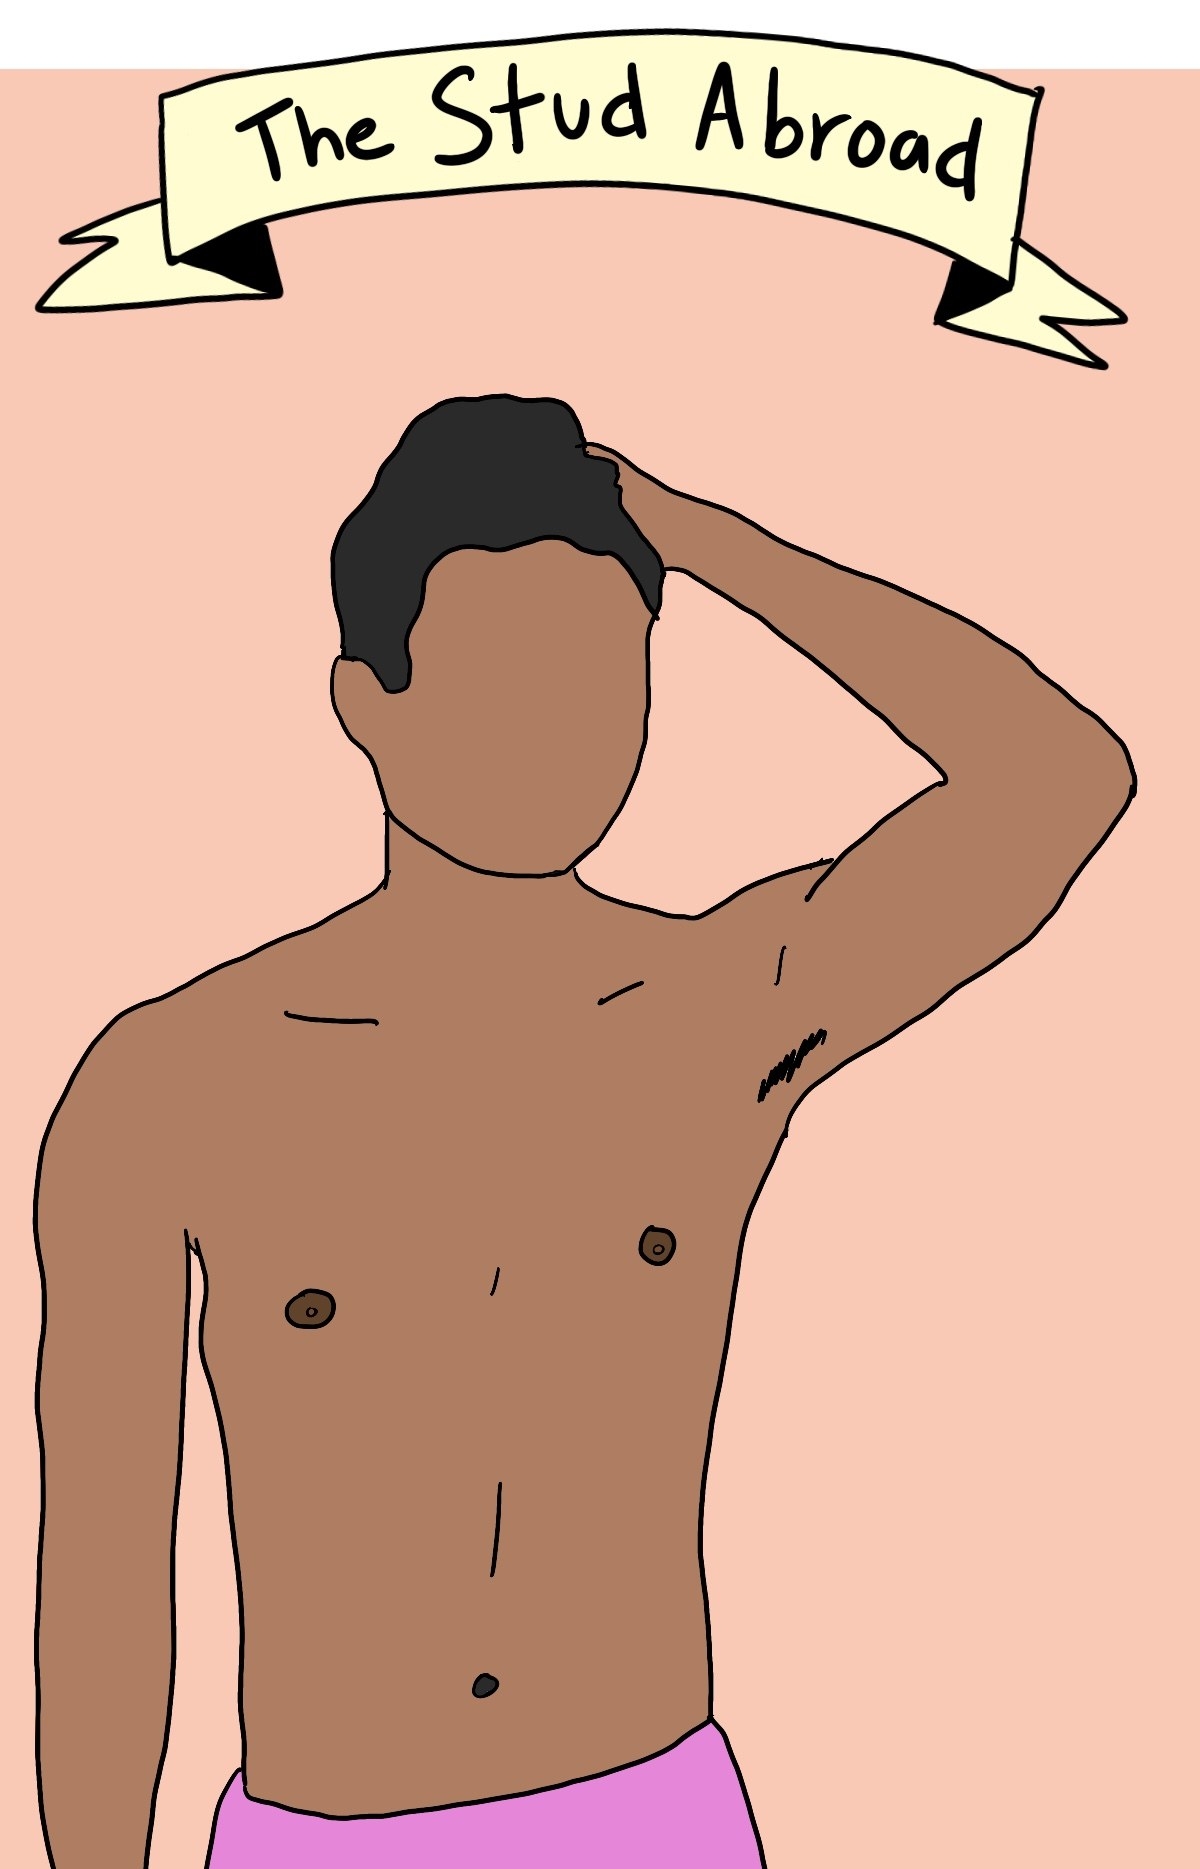 Drawing of a shirtless man with no face scratching his head